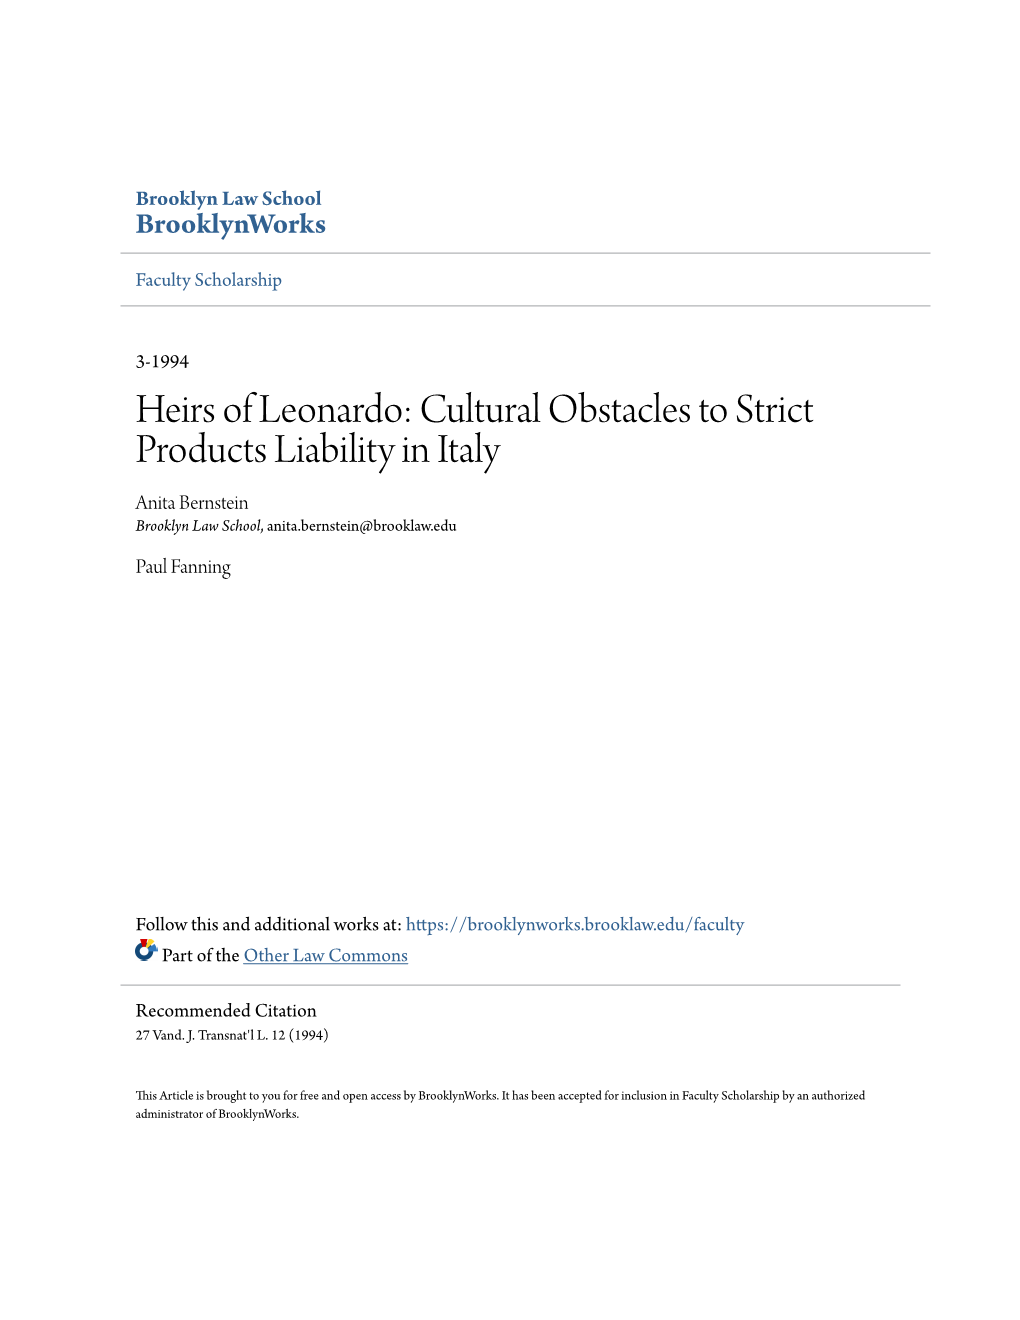 Cultural Obstacles to Strict Products Liability in Italy Anita Bernstein Brooklyn Law School, Anita.Bernstein@Brooklaw.Edu